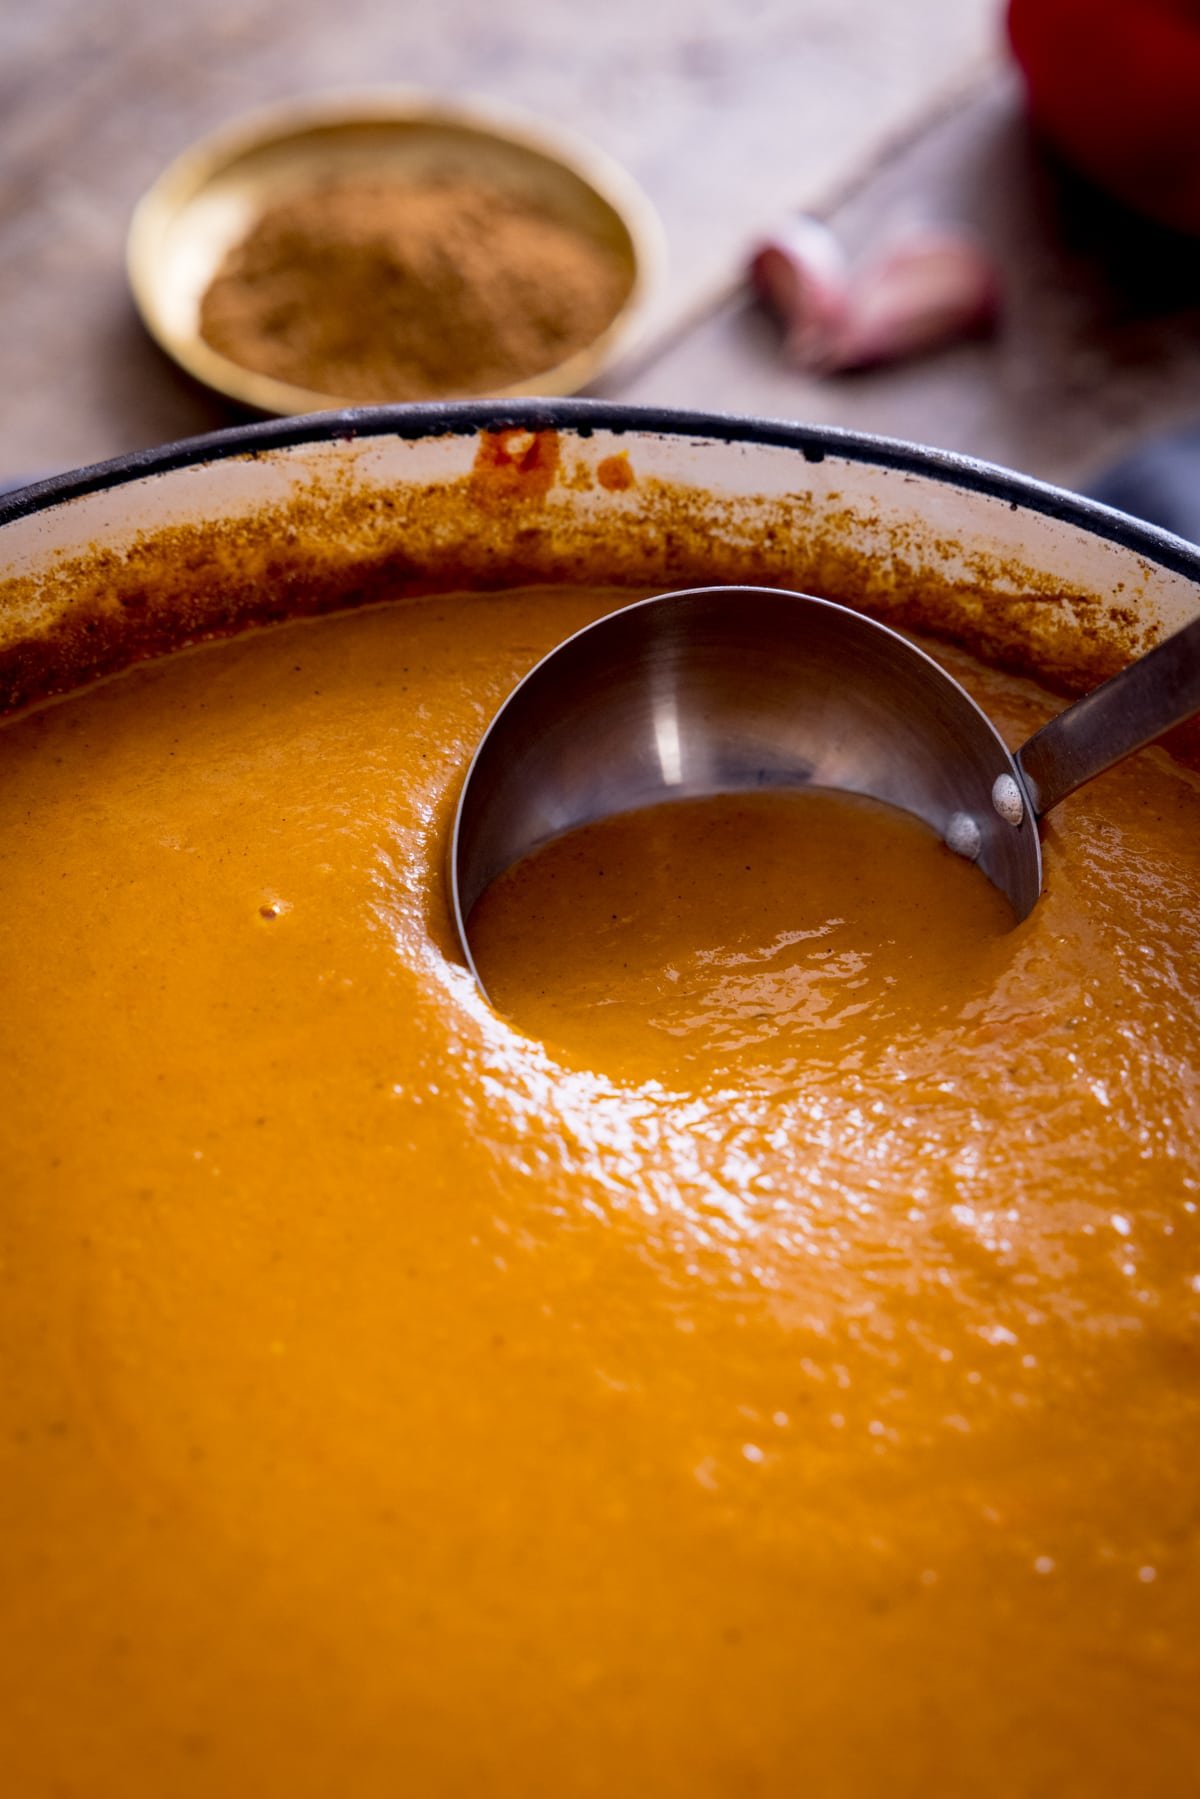 Ladle being dipped into a red cast iron pan filled with curry base gravy.